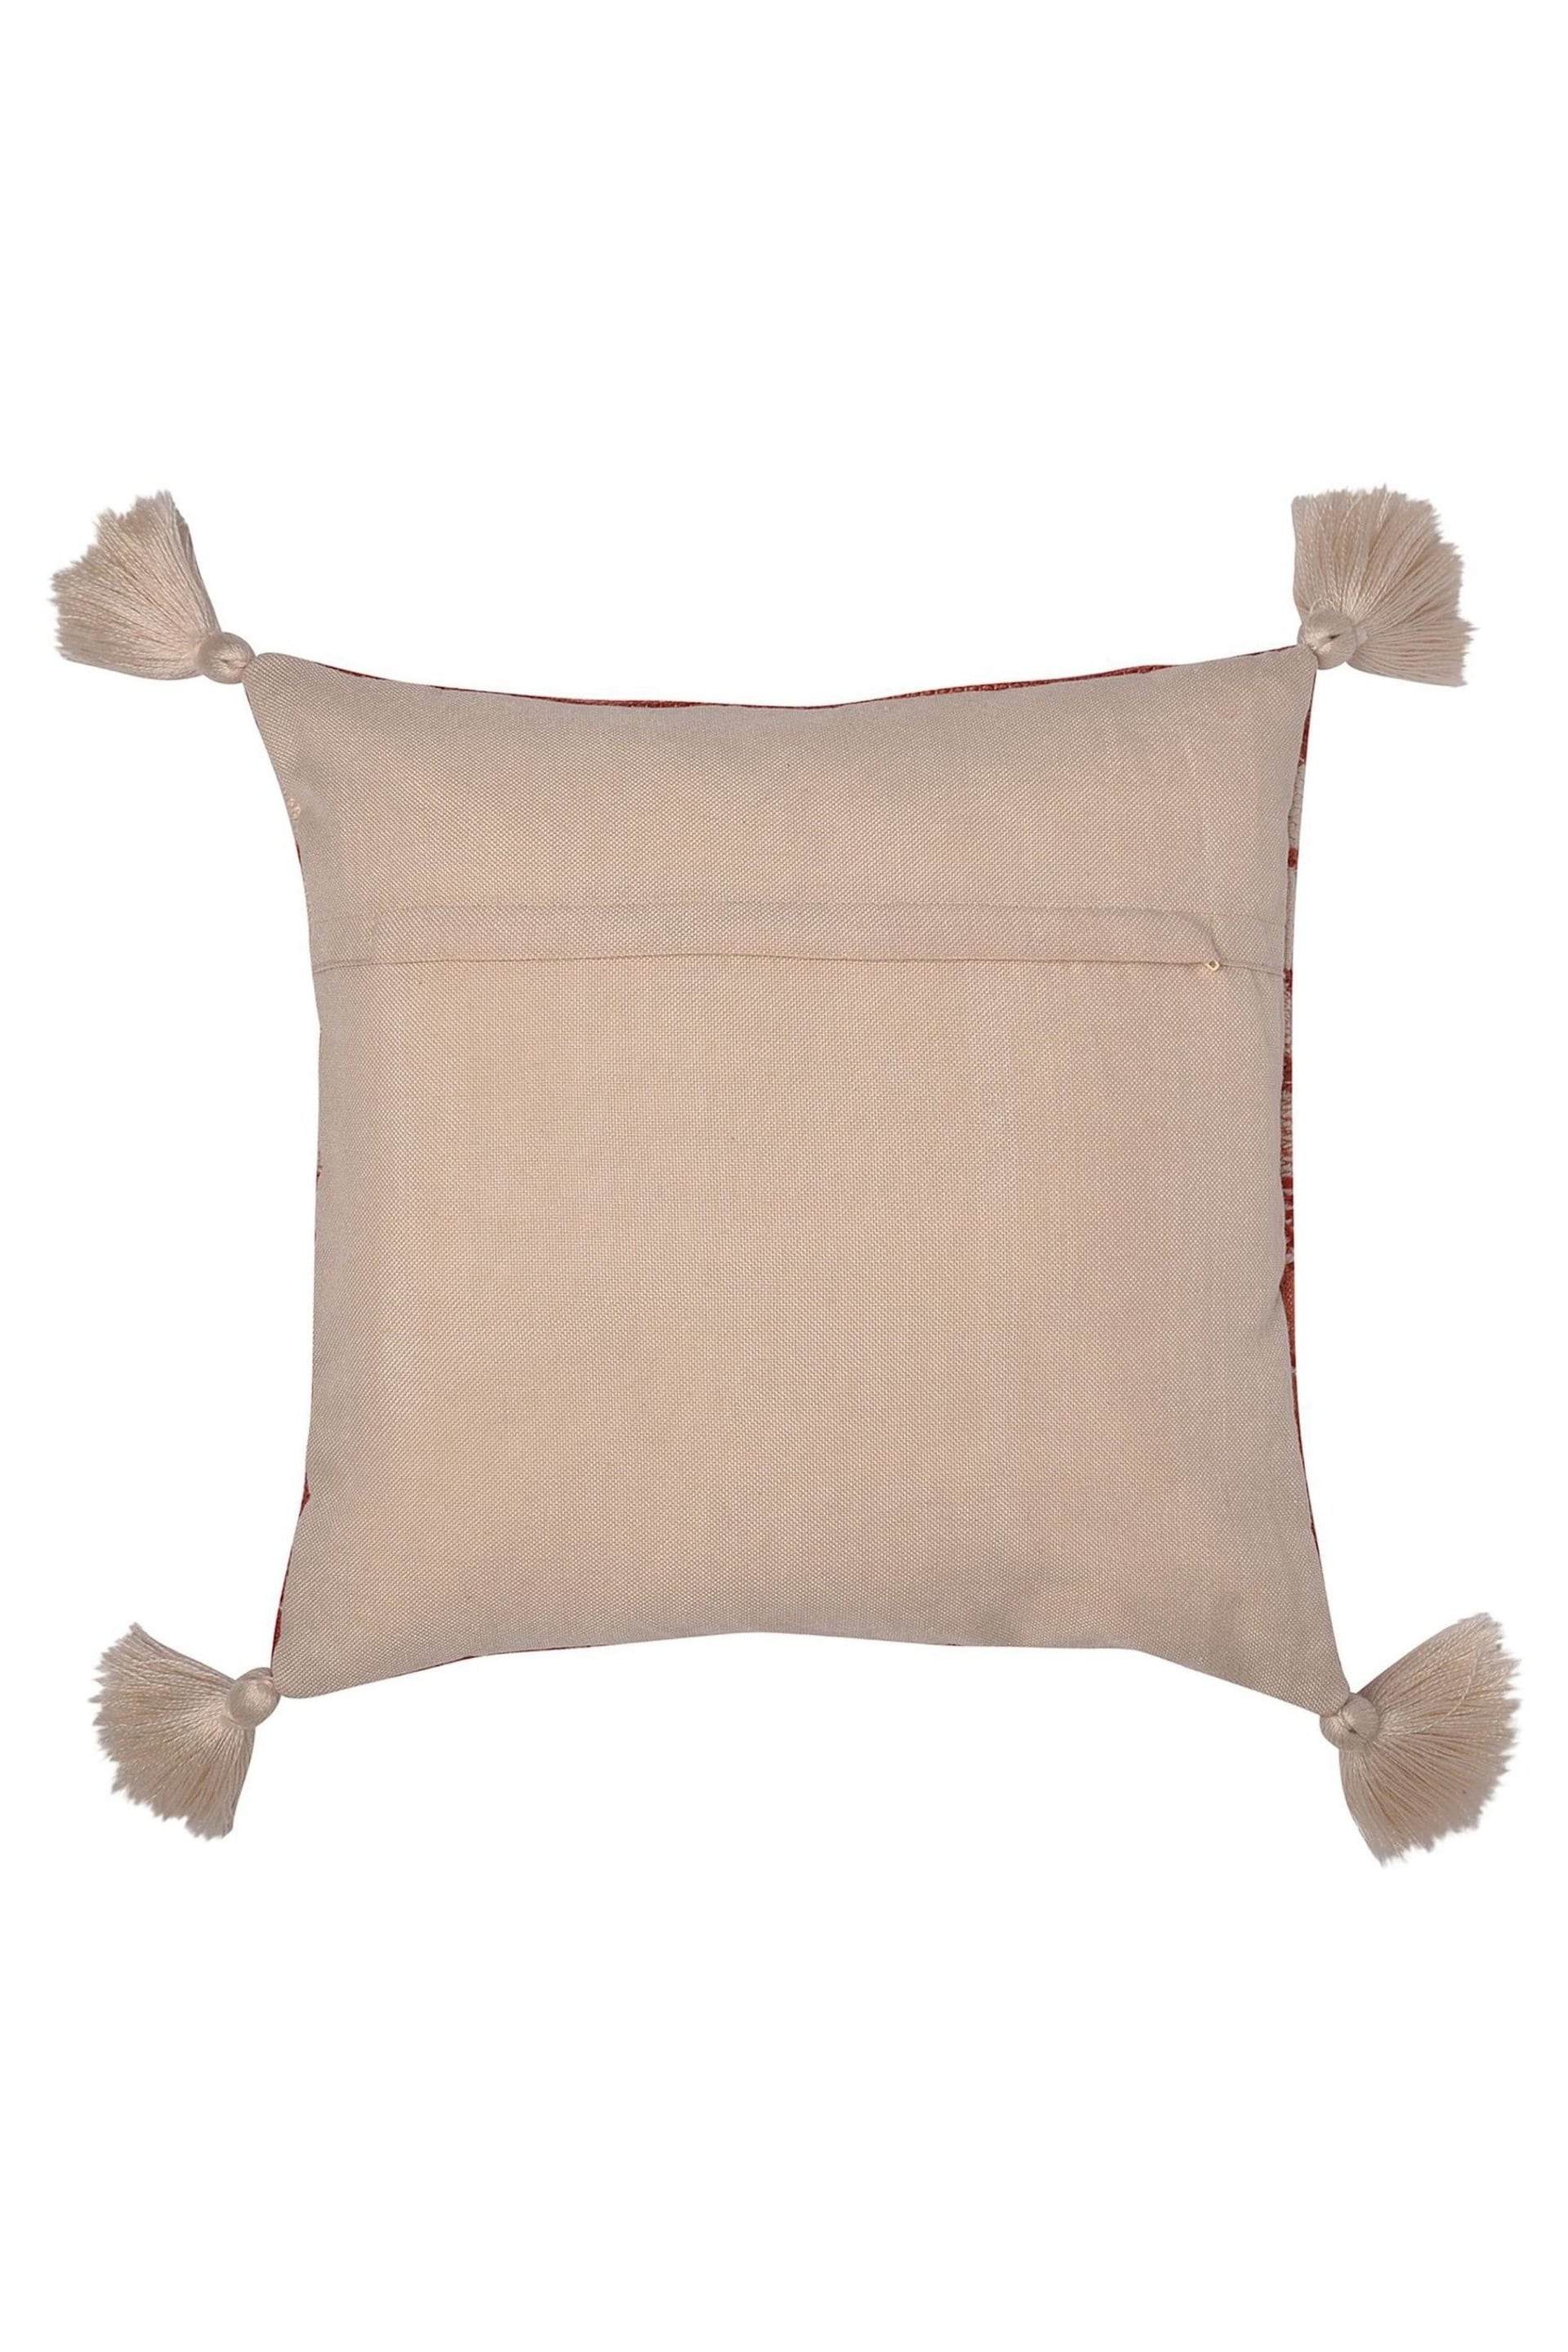 Drift Home Terracotta Red Grayson Outdoor Filled Cushion - Image 2 of 5